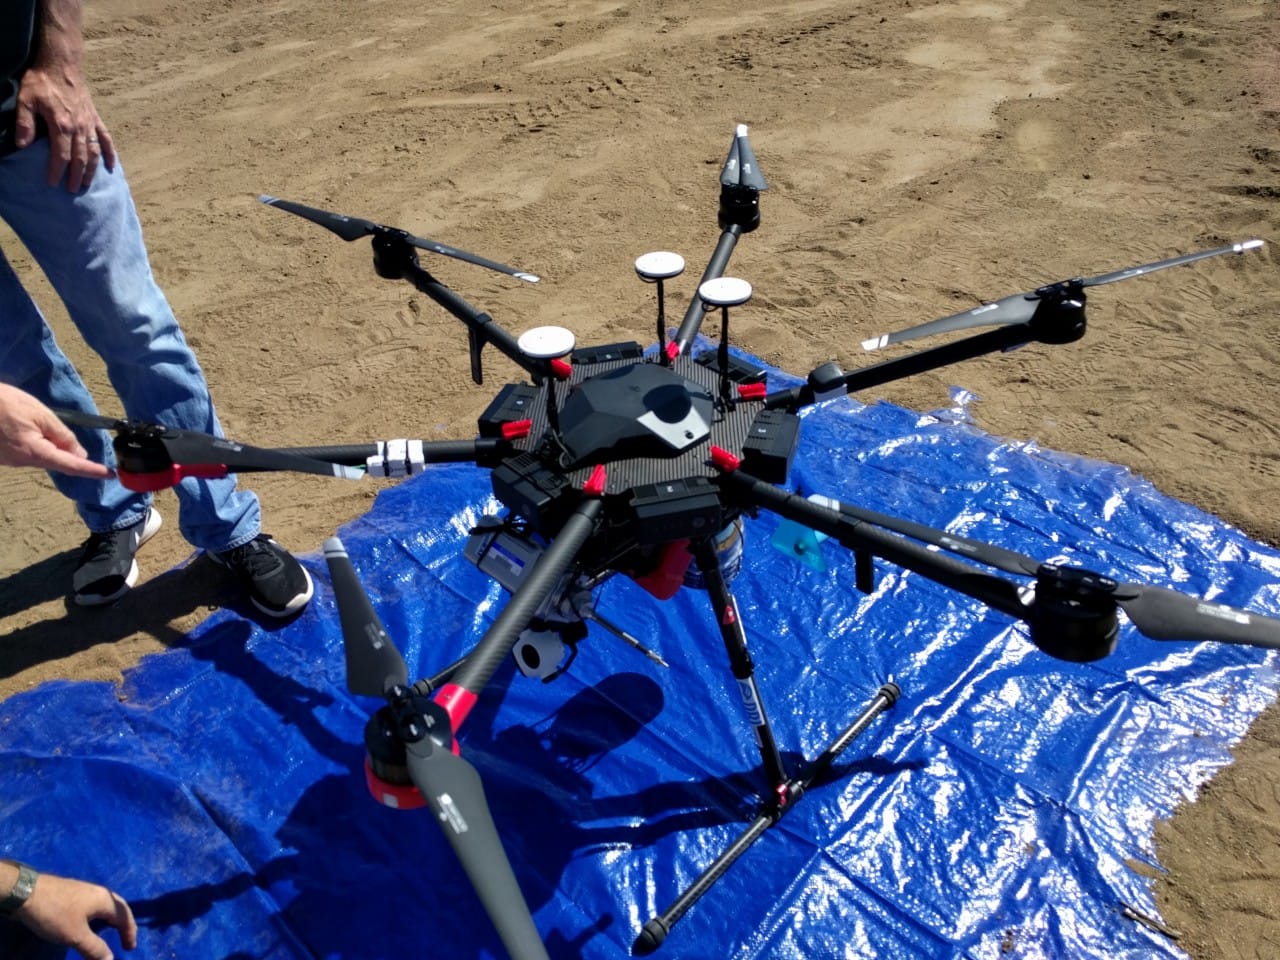 Drone-based Remote-sensing Experiments and Atmospheric Measurements